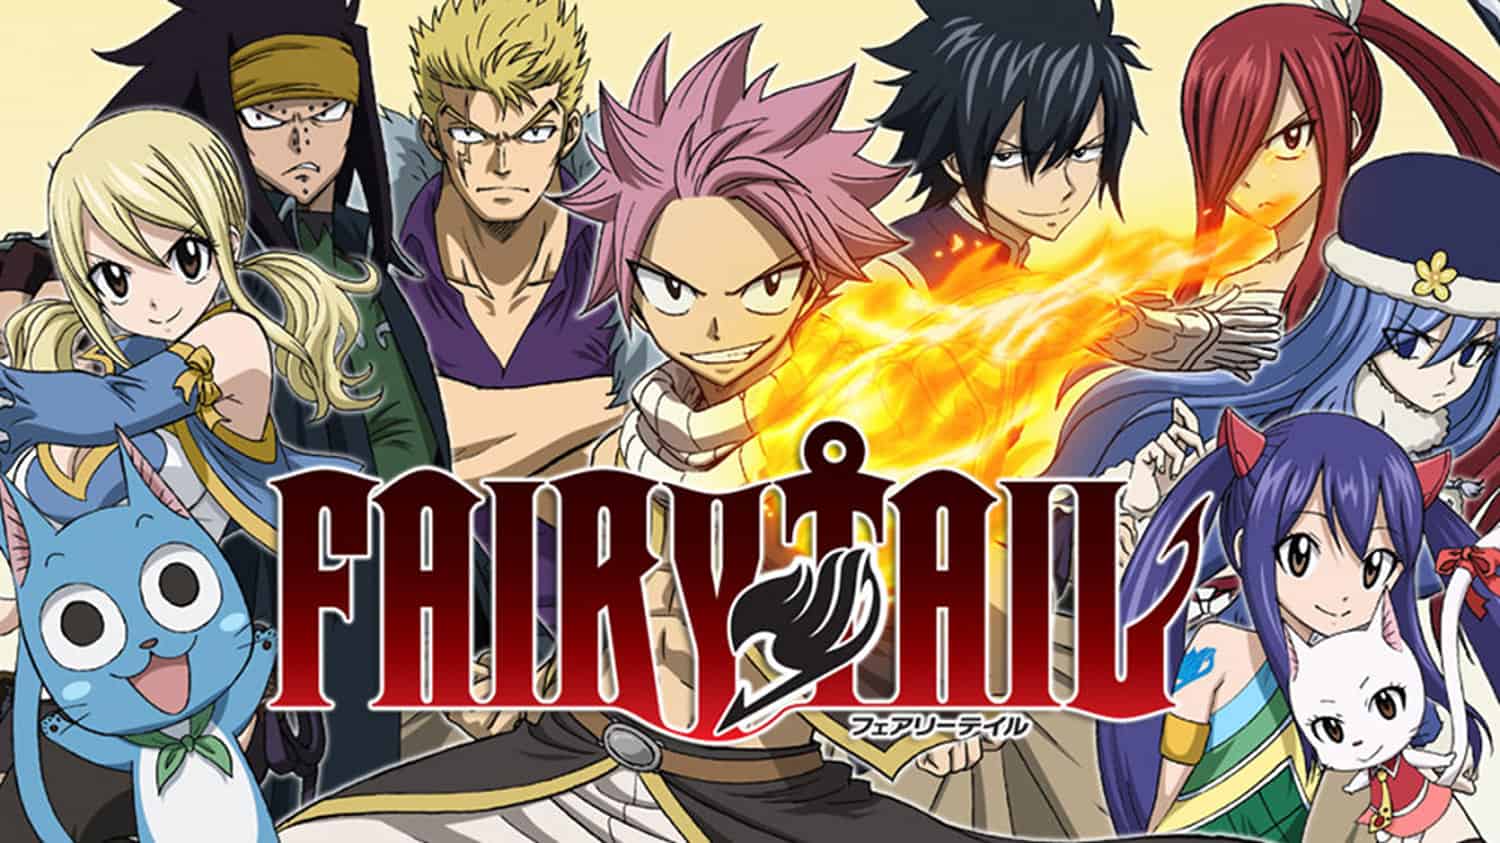 Erza's Voice Actor Hypes for Fairy Tail Anime's Return